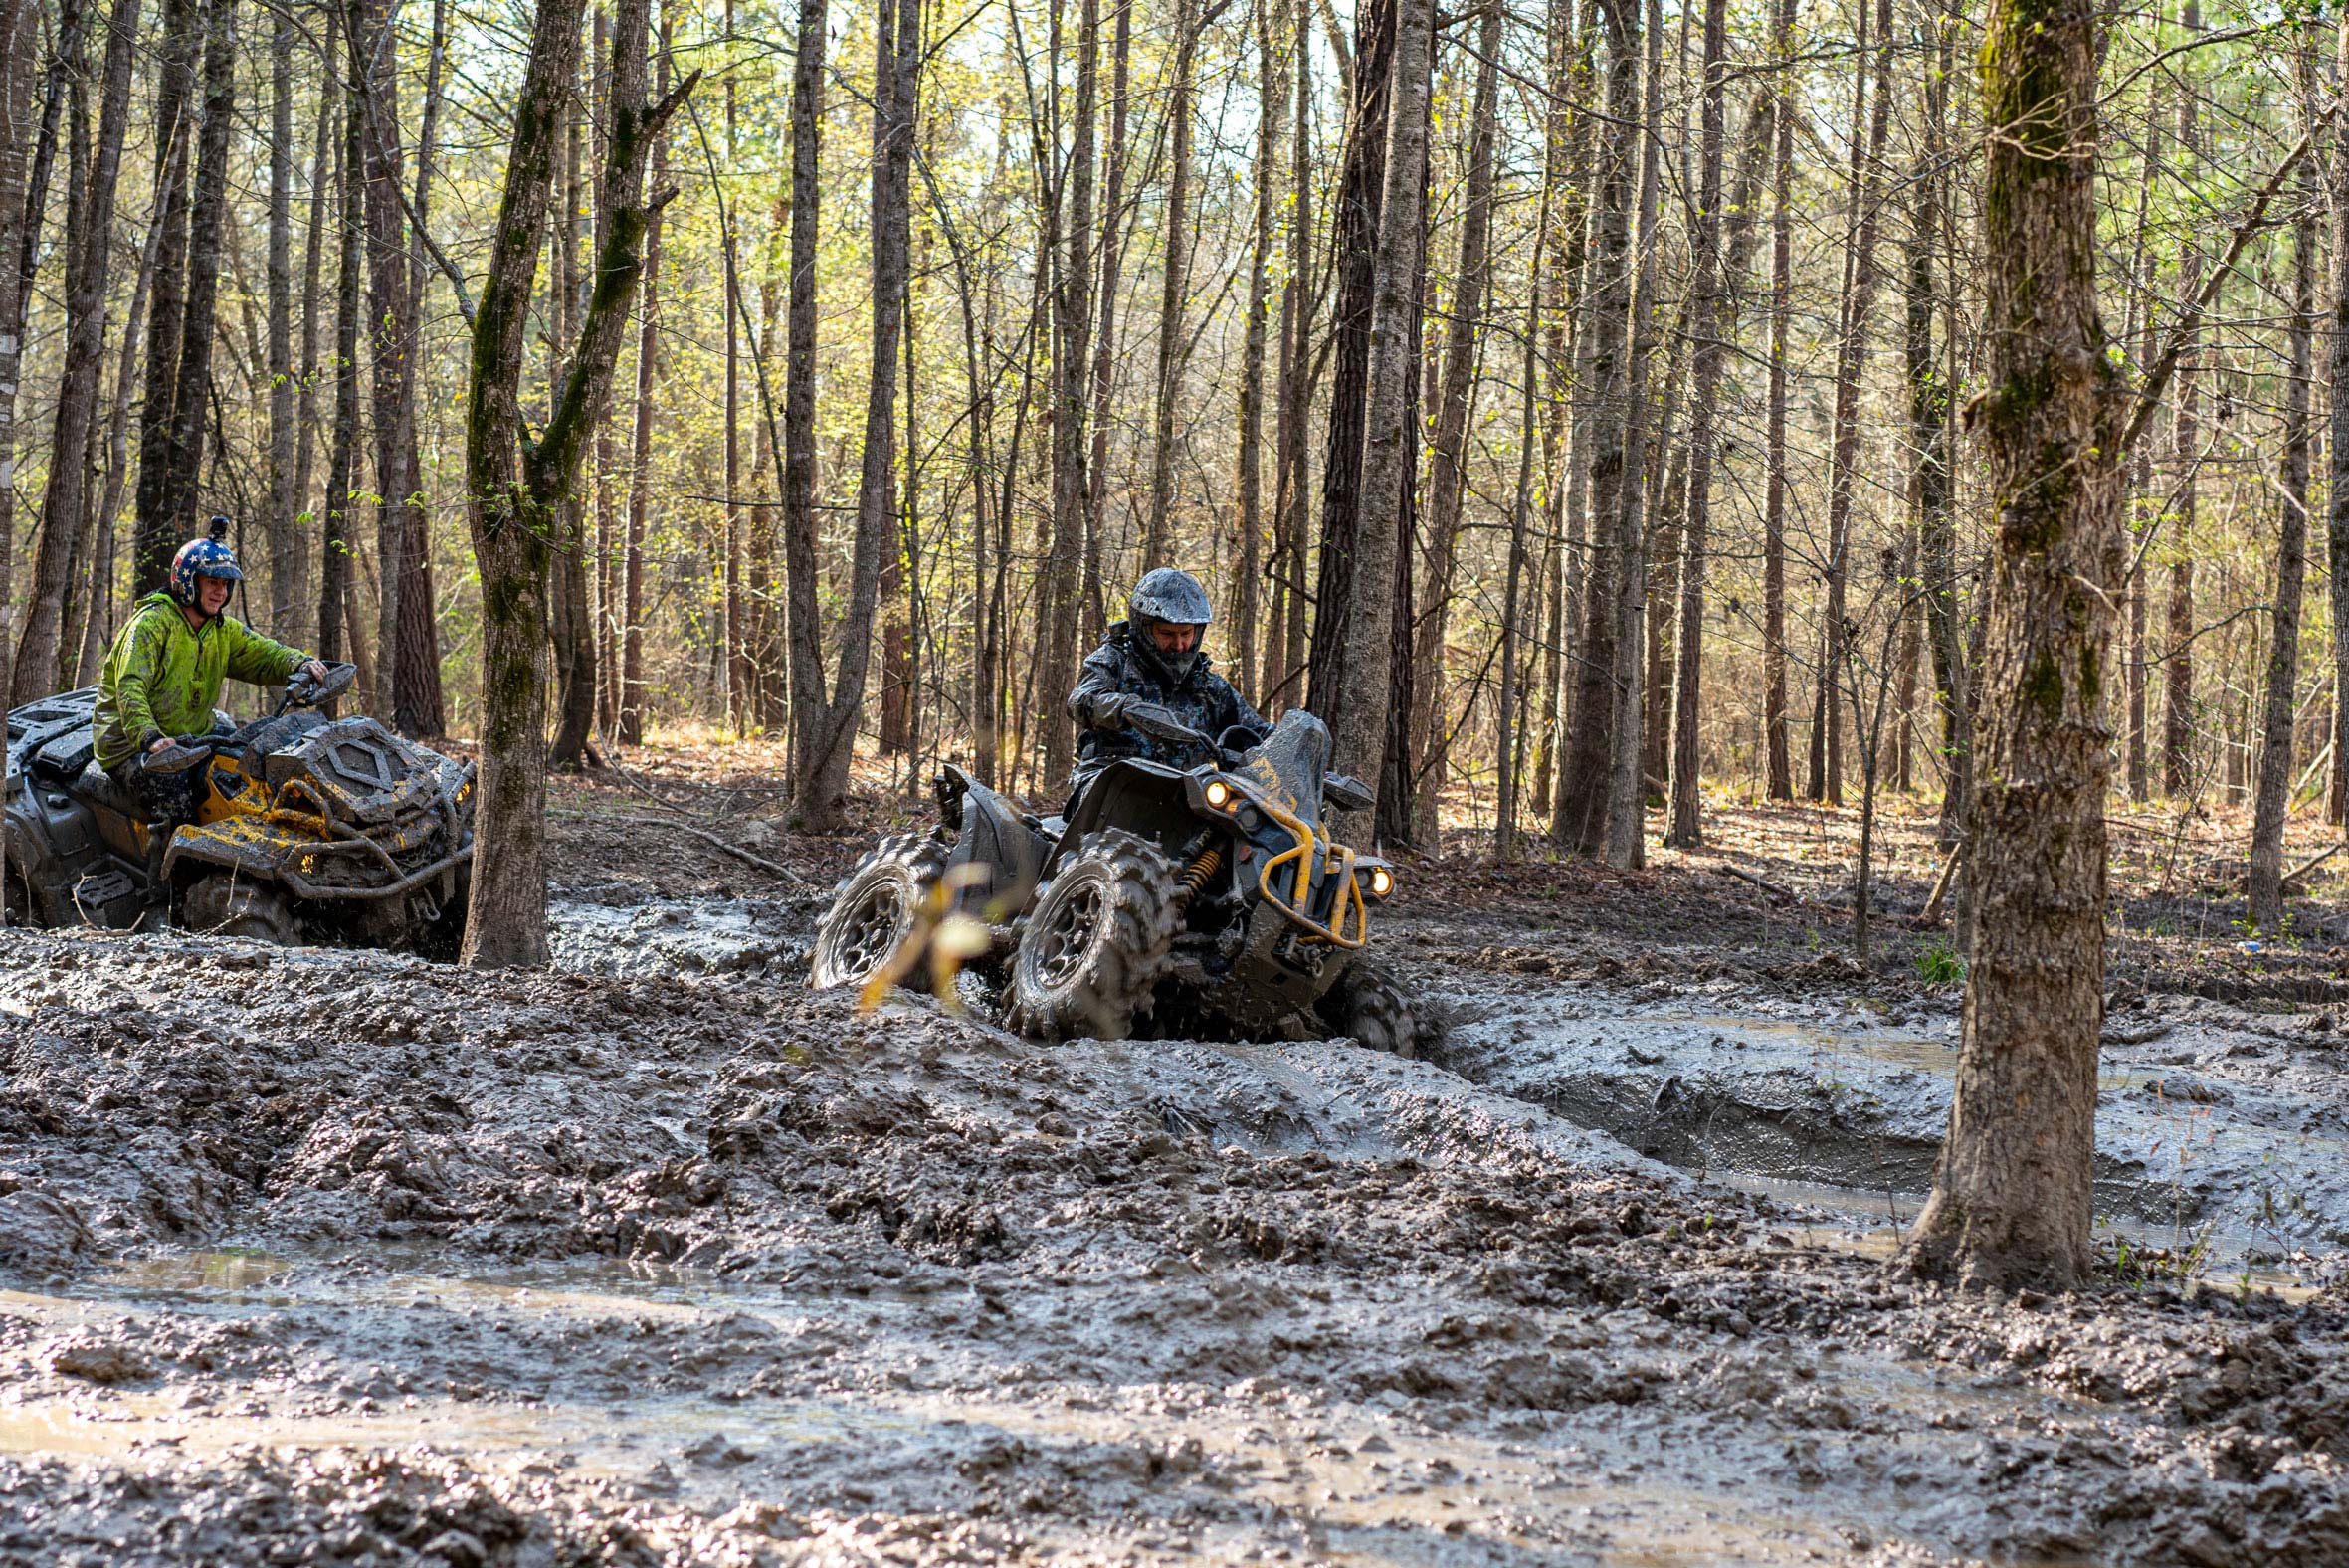 Two men riding new Can-Am X mr ATVs in the mud